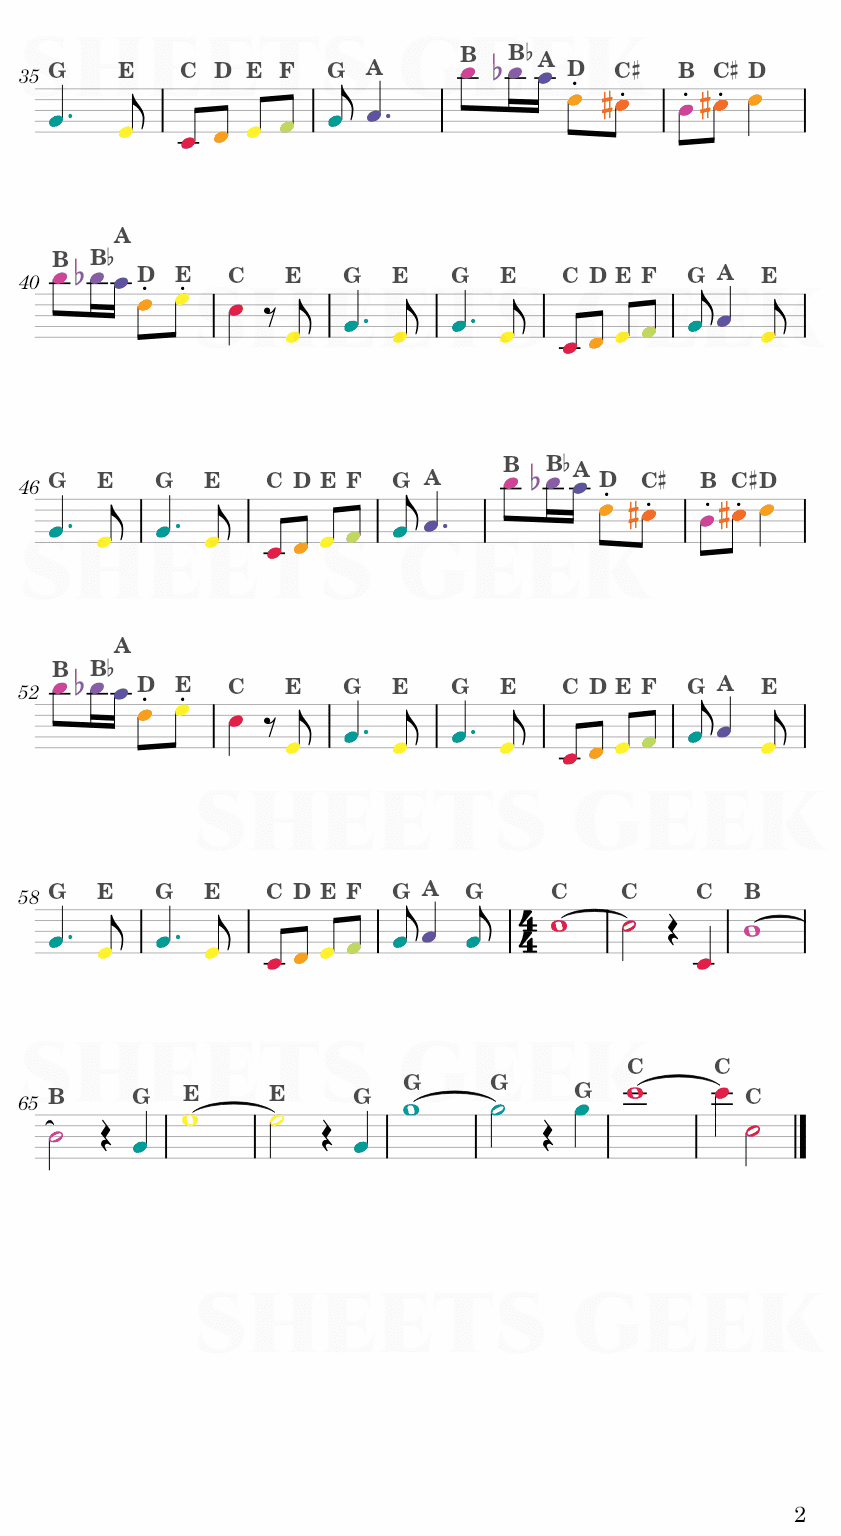 So Long, Farewell - Sound of Music Easy Sheet Music Free for piano, keyboard, flute, violin, sax, cello page 2